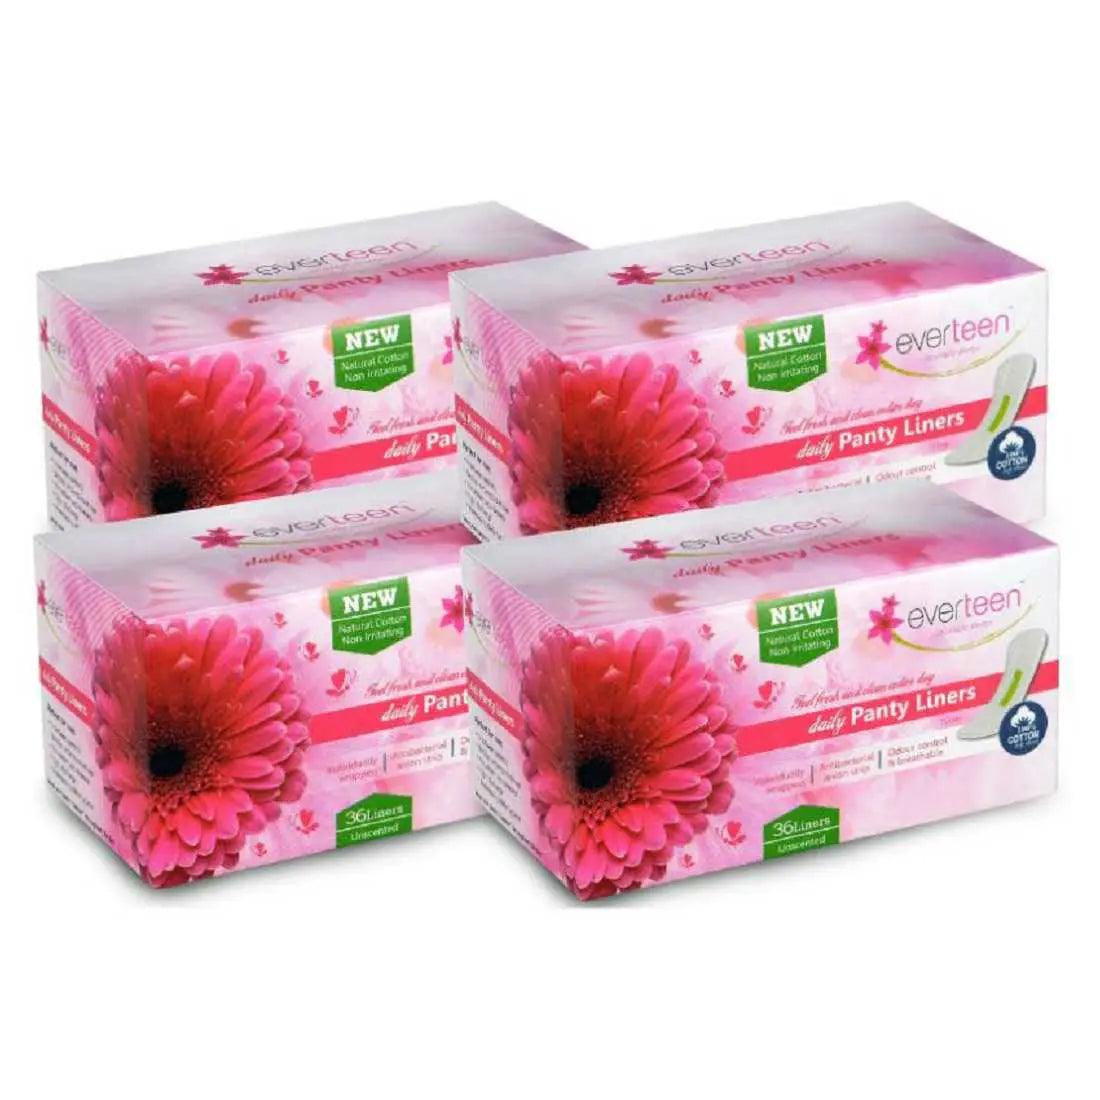 everteen Natural Cotton Daily Panty Liners for Women 8908003648330